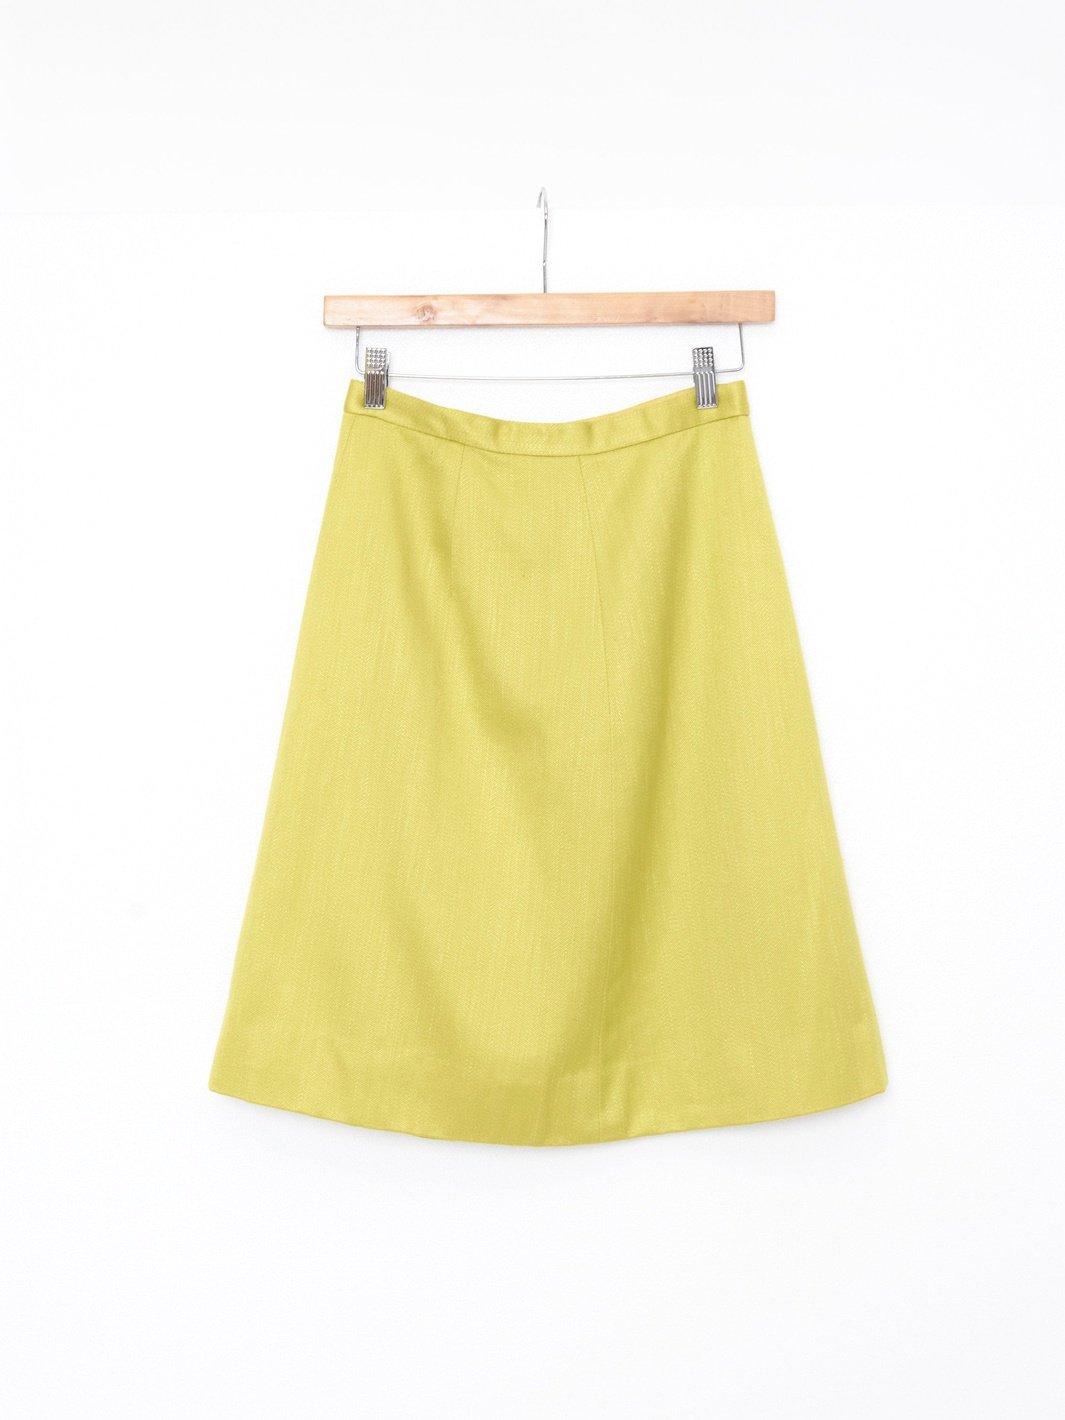 1960s knee-length Gio Caré skirt in lime green cotton